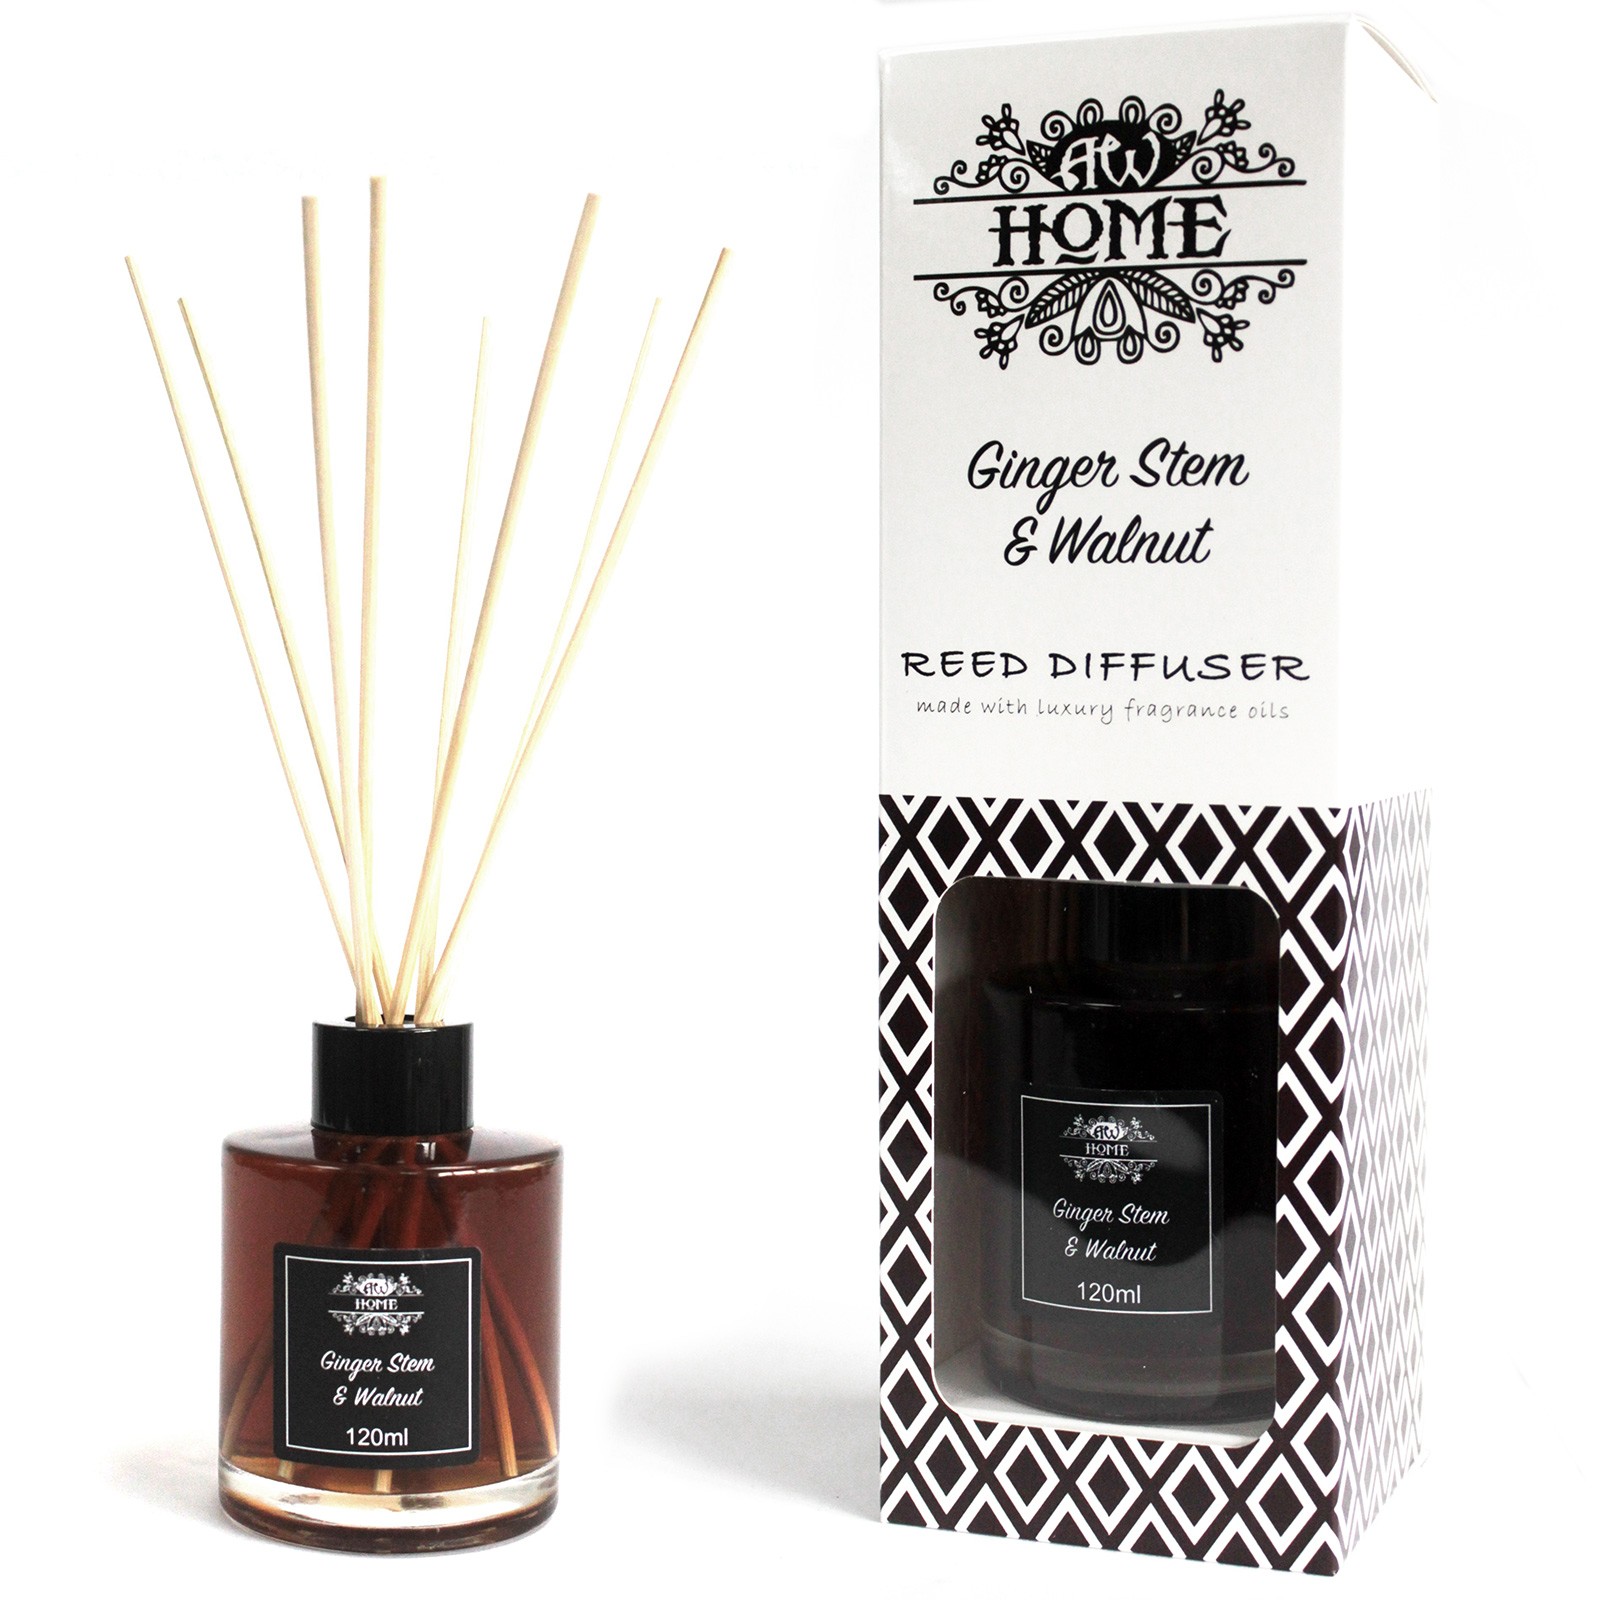 Ginger Stem & Walnut - Home Fragrance Reed Diffuser - 120ml With Reeds